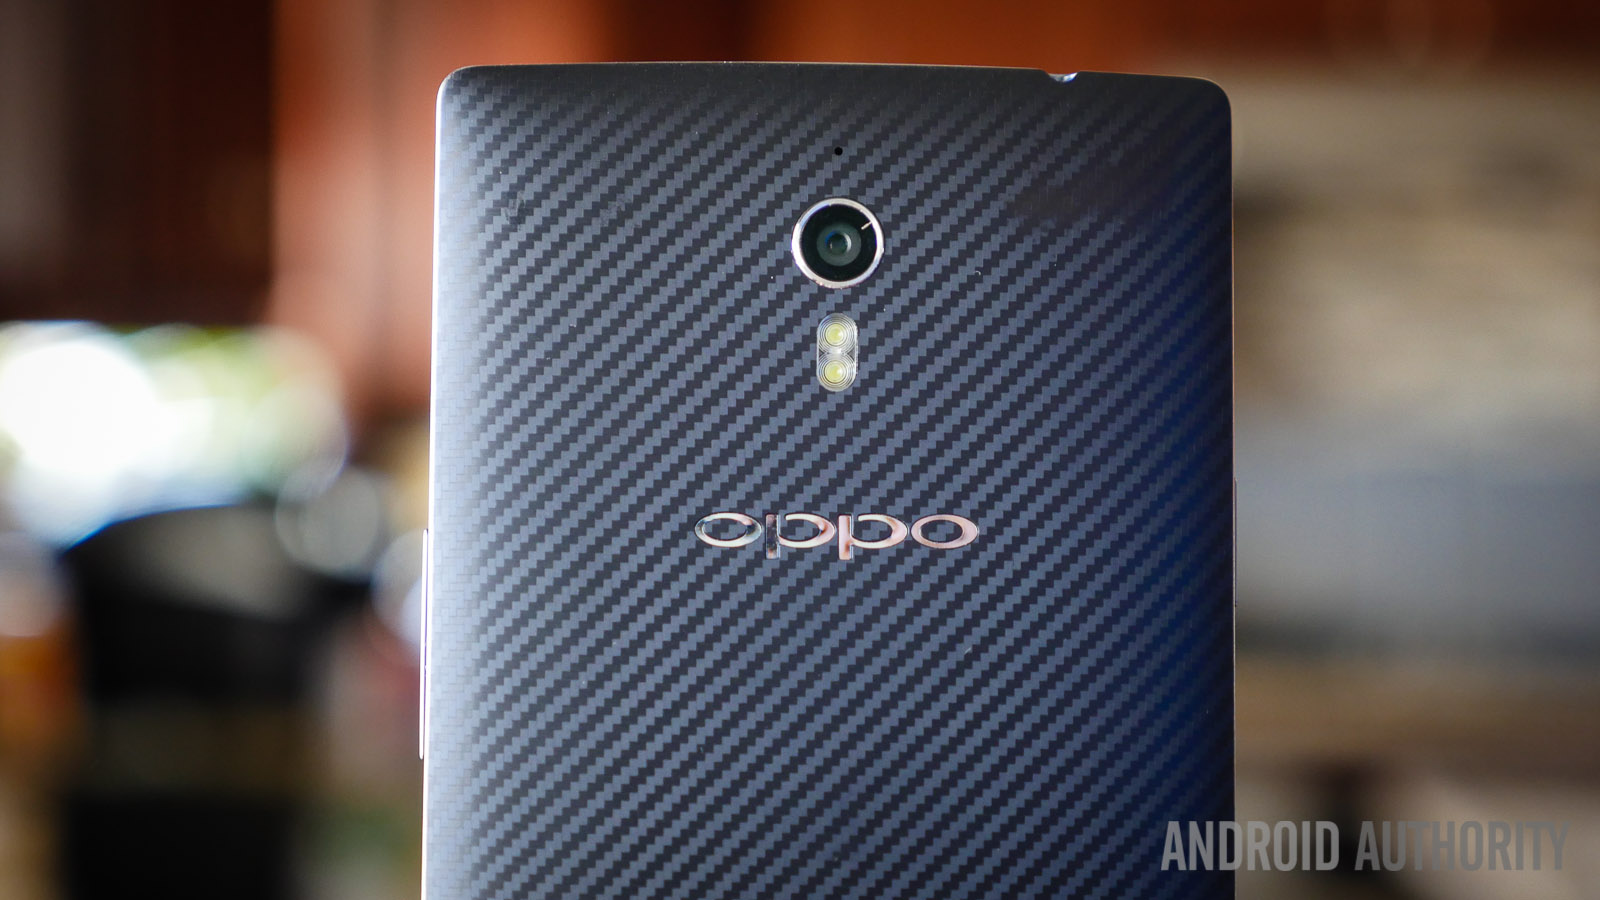 The OPPO Find 7.